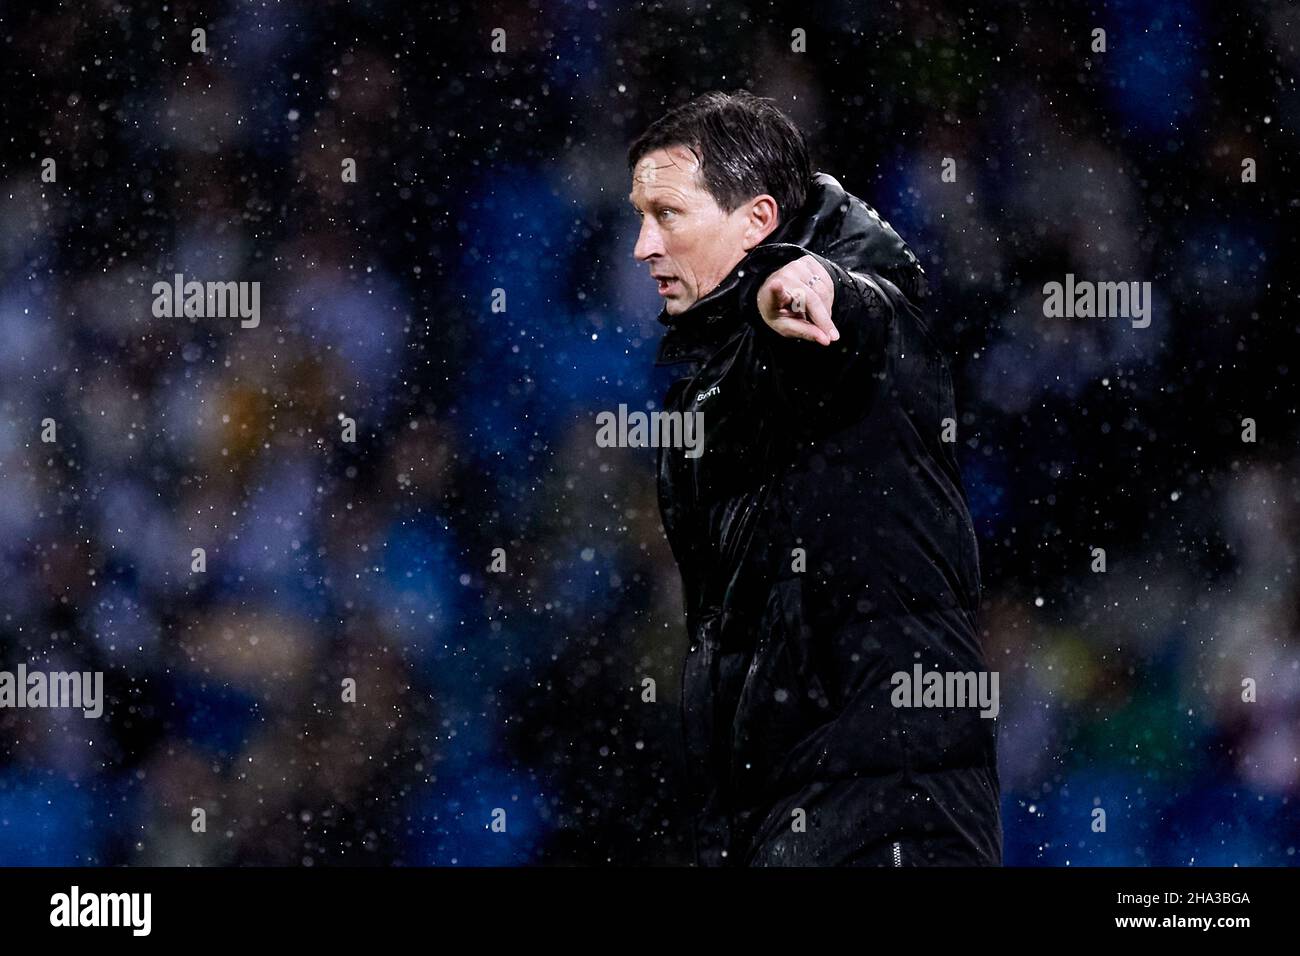 SAN SEBASTIAN, SPAIN - DECEMBER 09: Roger Schmidt Head coach of PSV Eindhoven reacts during the UEFA Europa League group B match between Real Sociedad and PSV Eindhoven at Estadio Anoeta on December 9, 2021 in San Sebastian, Spain. (Photo by MB Media) Stock Photo